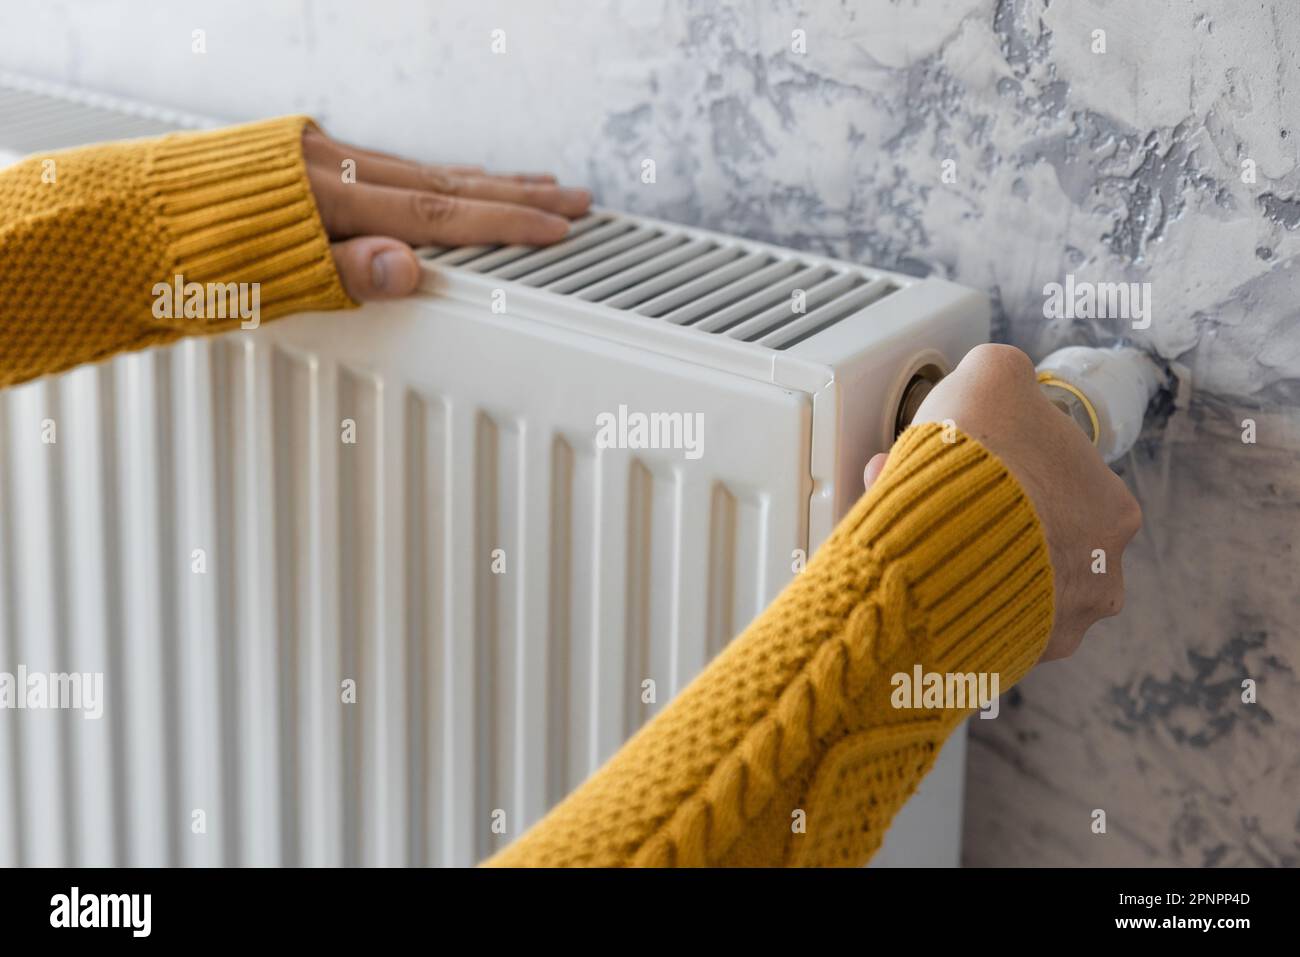 Man adjusting heating radiator or heater to install comfort temperature for energy efficiency and economy in winter. Concept of heating season Stock Photo